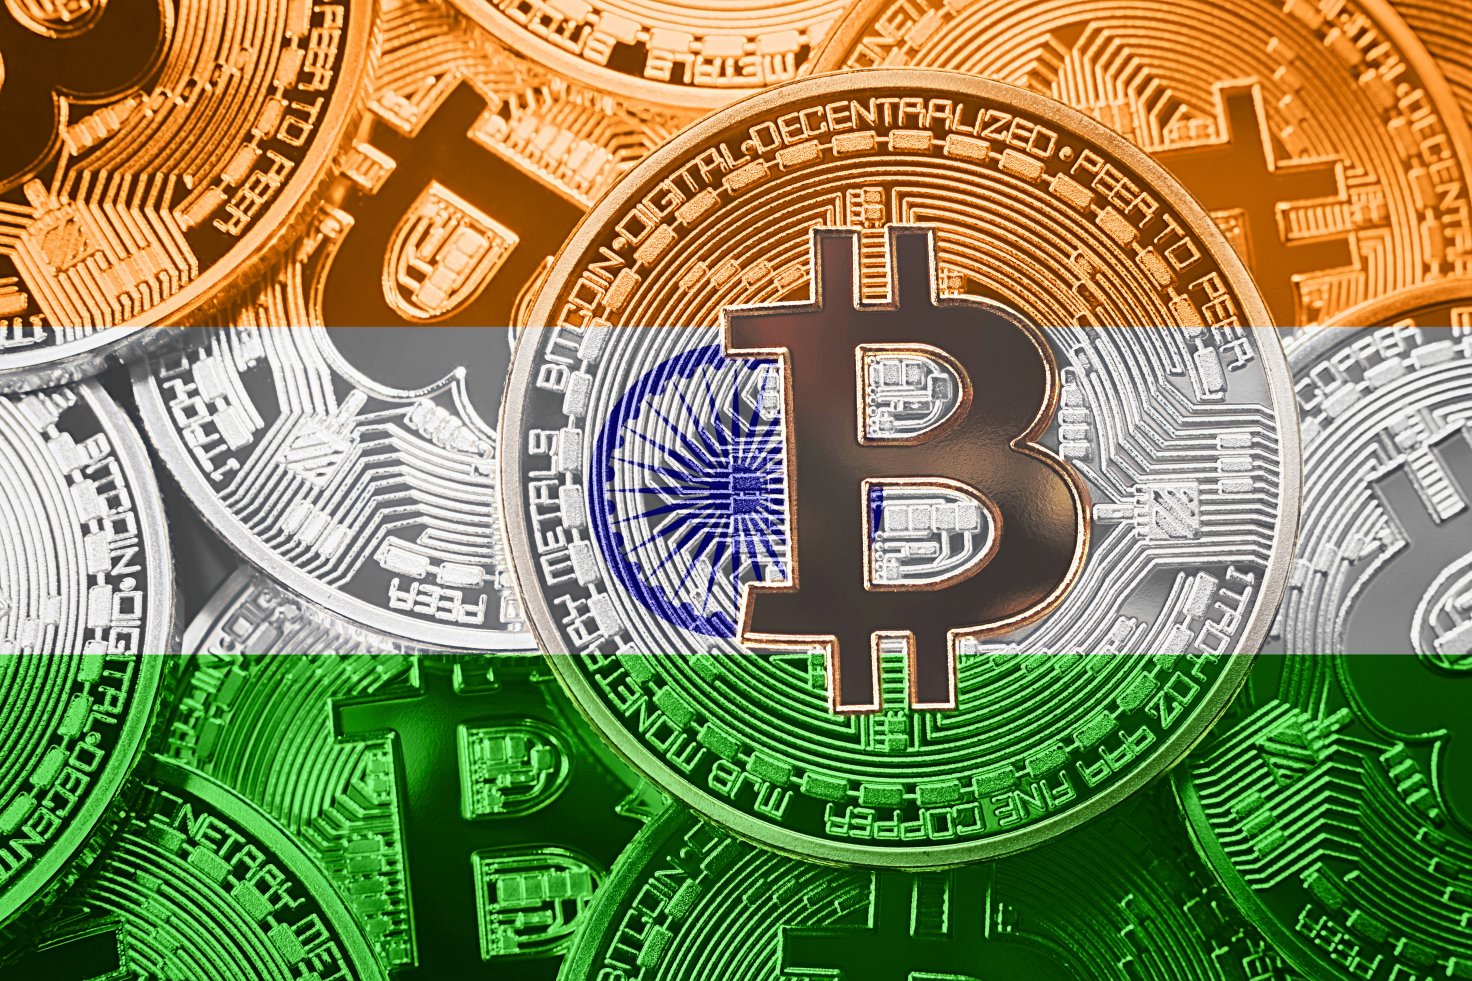 is crypto allowed in india